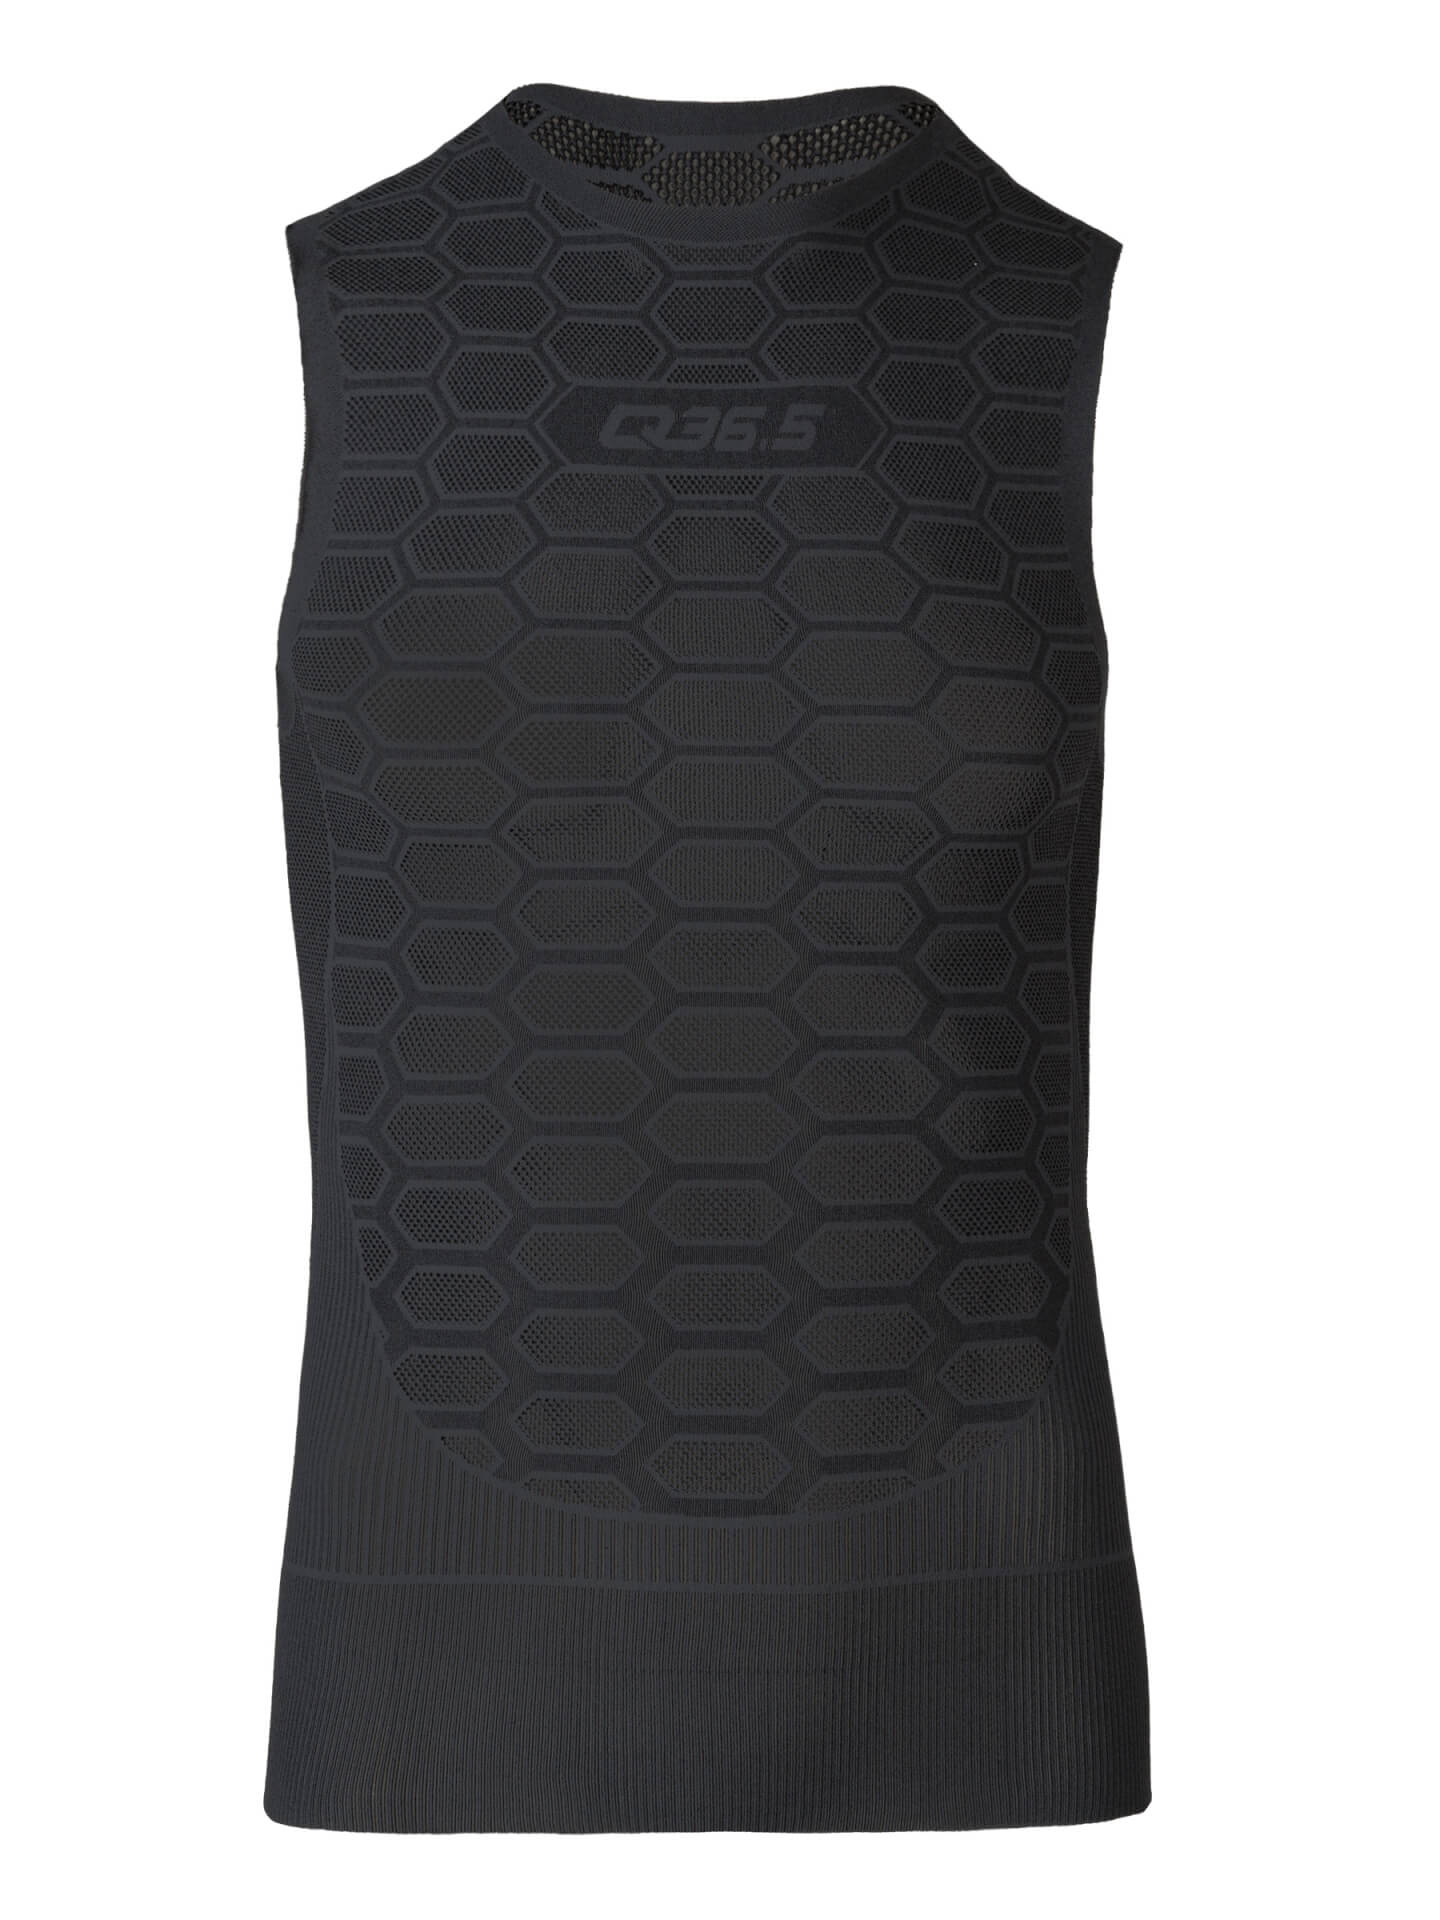 Cycling Base Layer 1 Sleeveless - Anthracite Grey • Q36.5